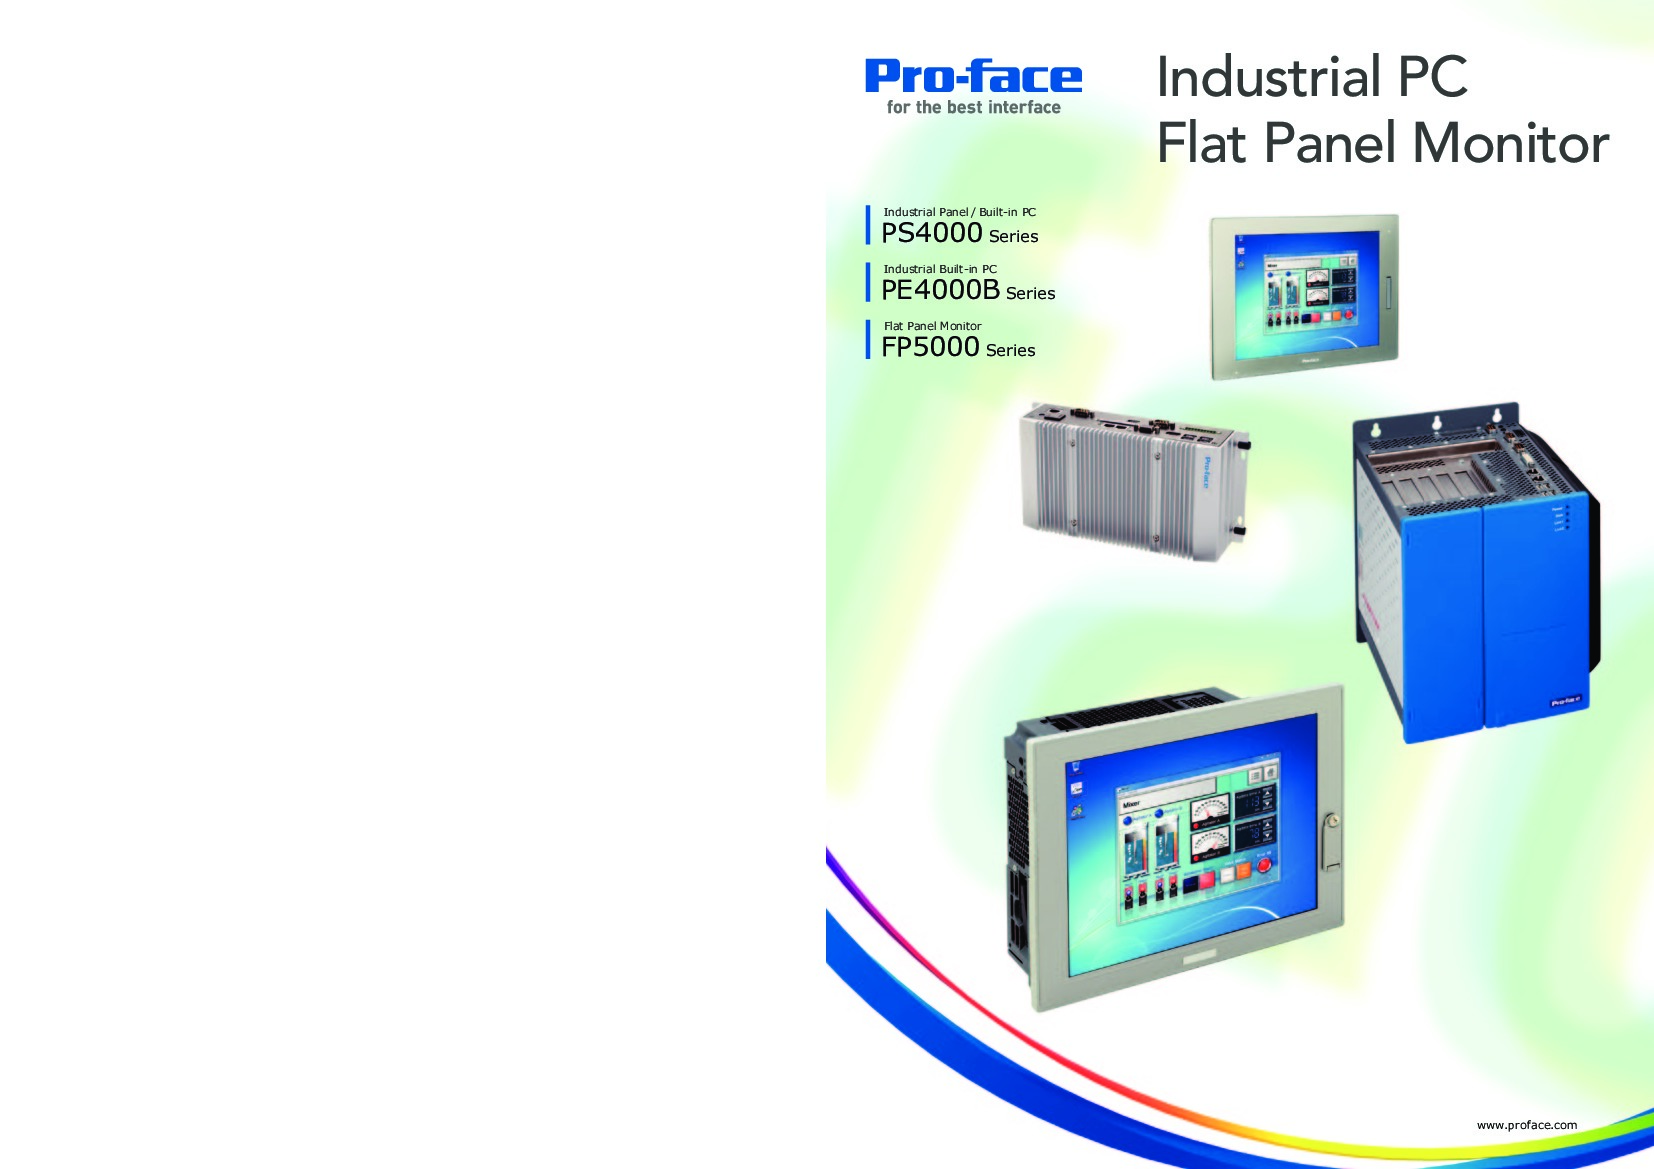 First Page Image of PFXPP170CA40N04N00 PS4000 Series Pro-Face Catalog.pdf